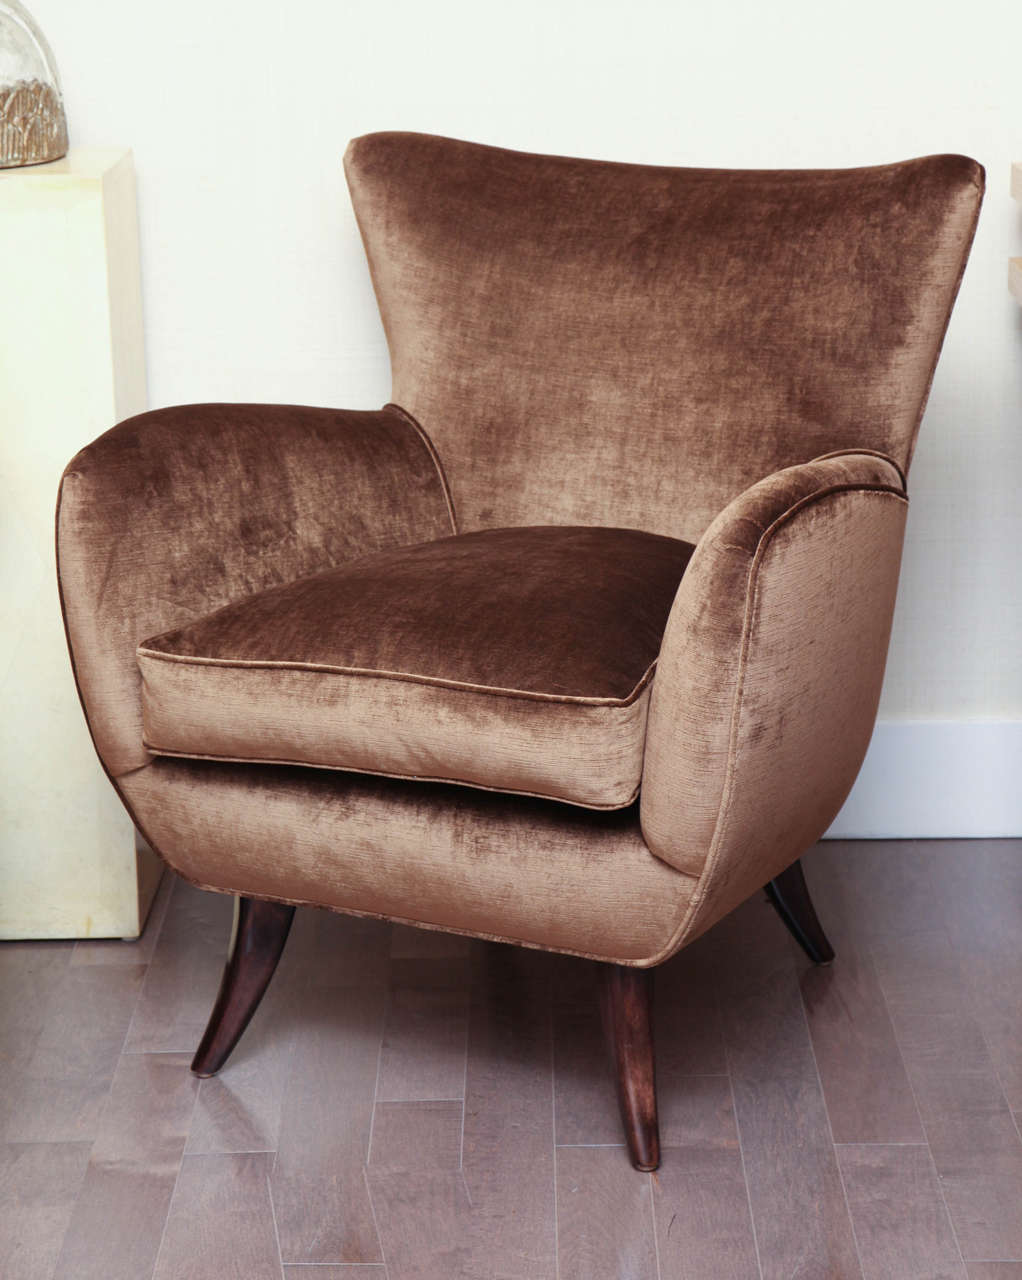 Pair of arm chairs upholstered in a rich copper-brown velvet fabric by Ernst Schwadron c. 1940